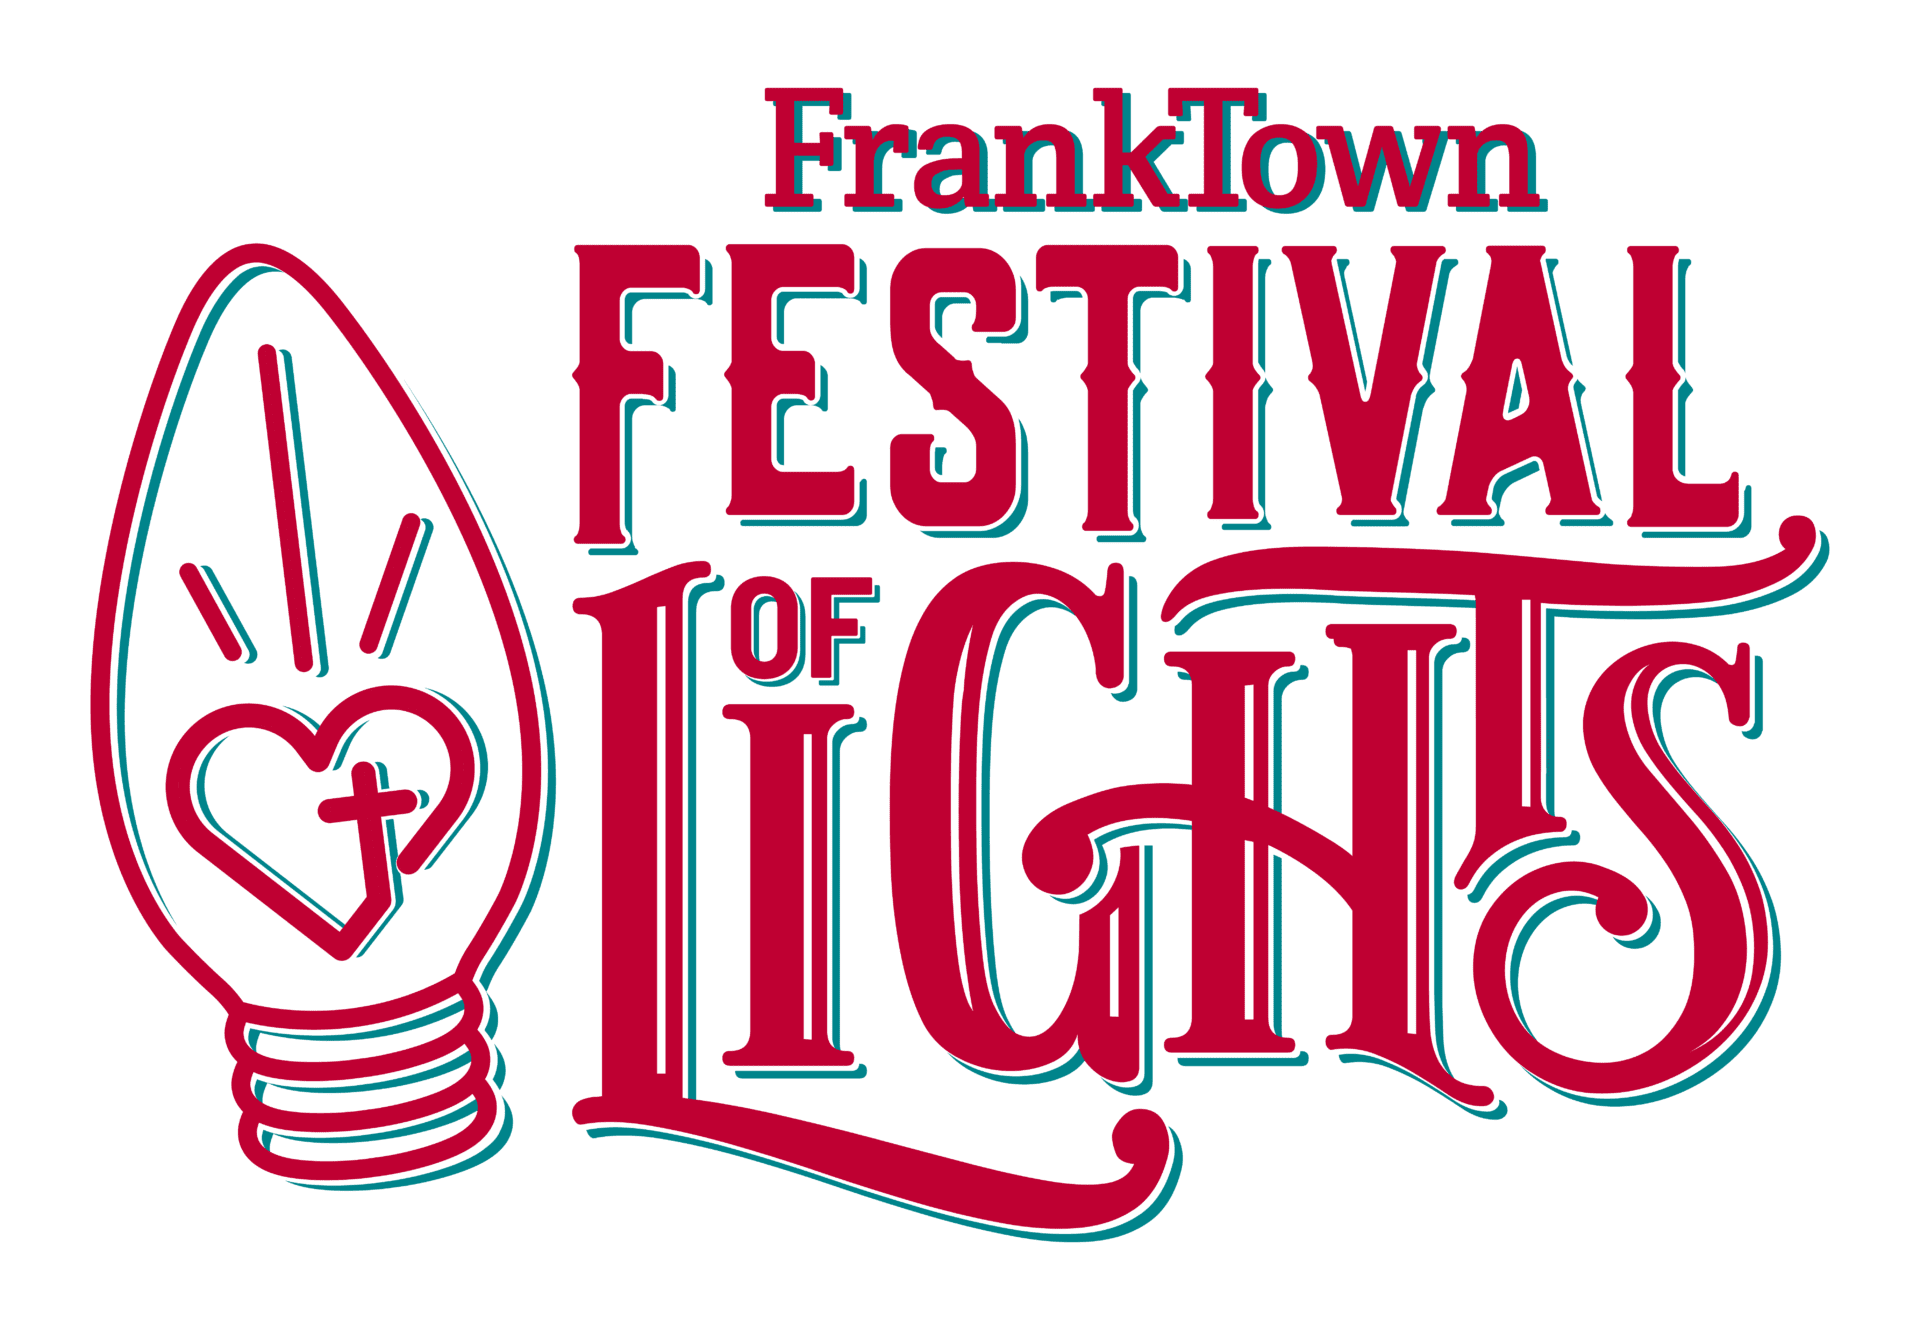 FrankTown Festival of Lights in Franklin Tennessee is the longest drive through holiday lights spectacular in Williamson County!